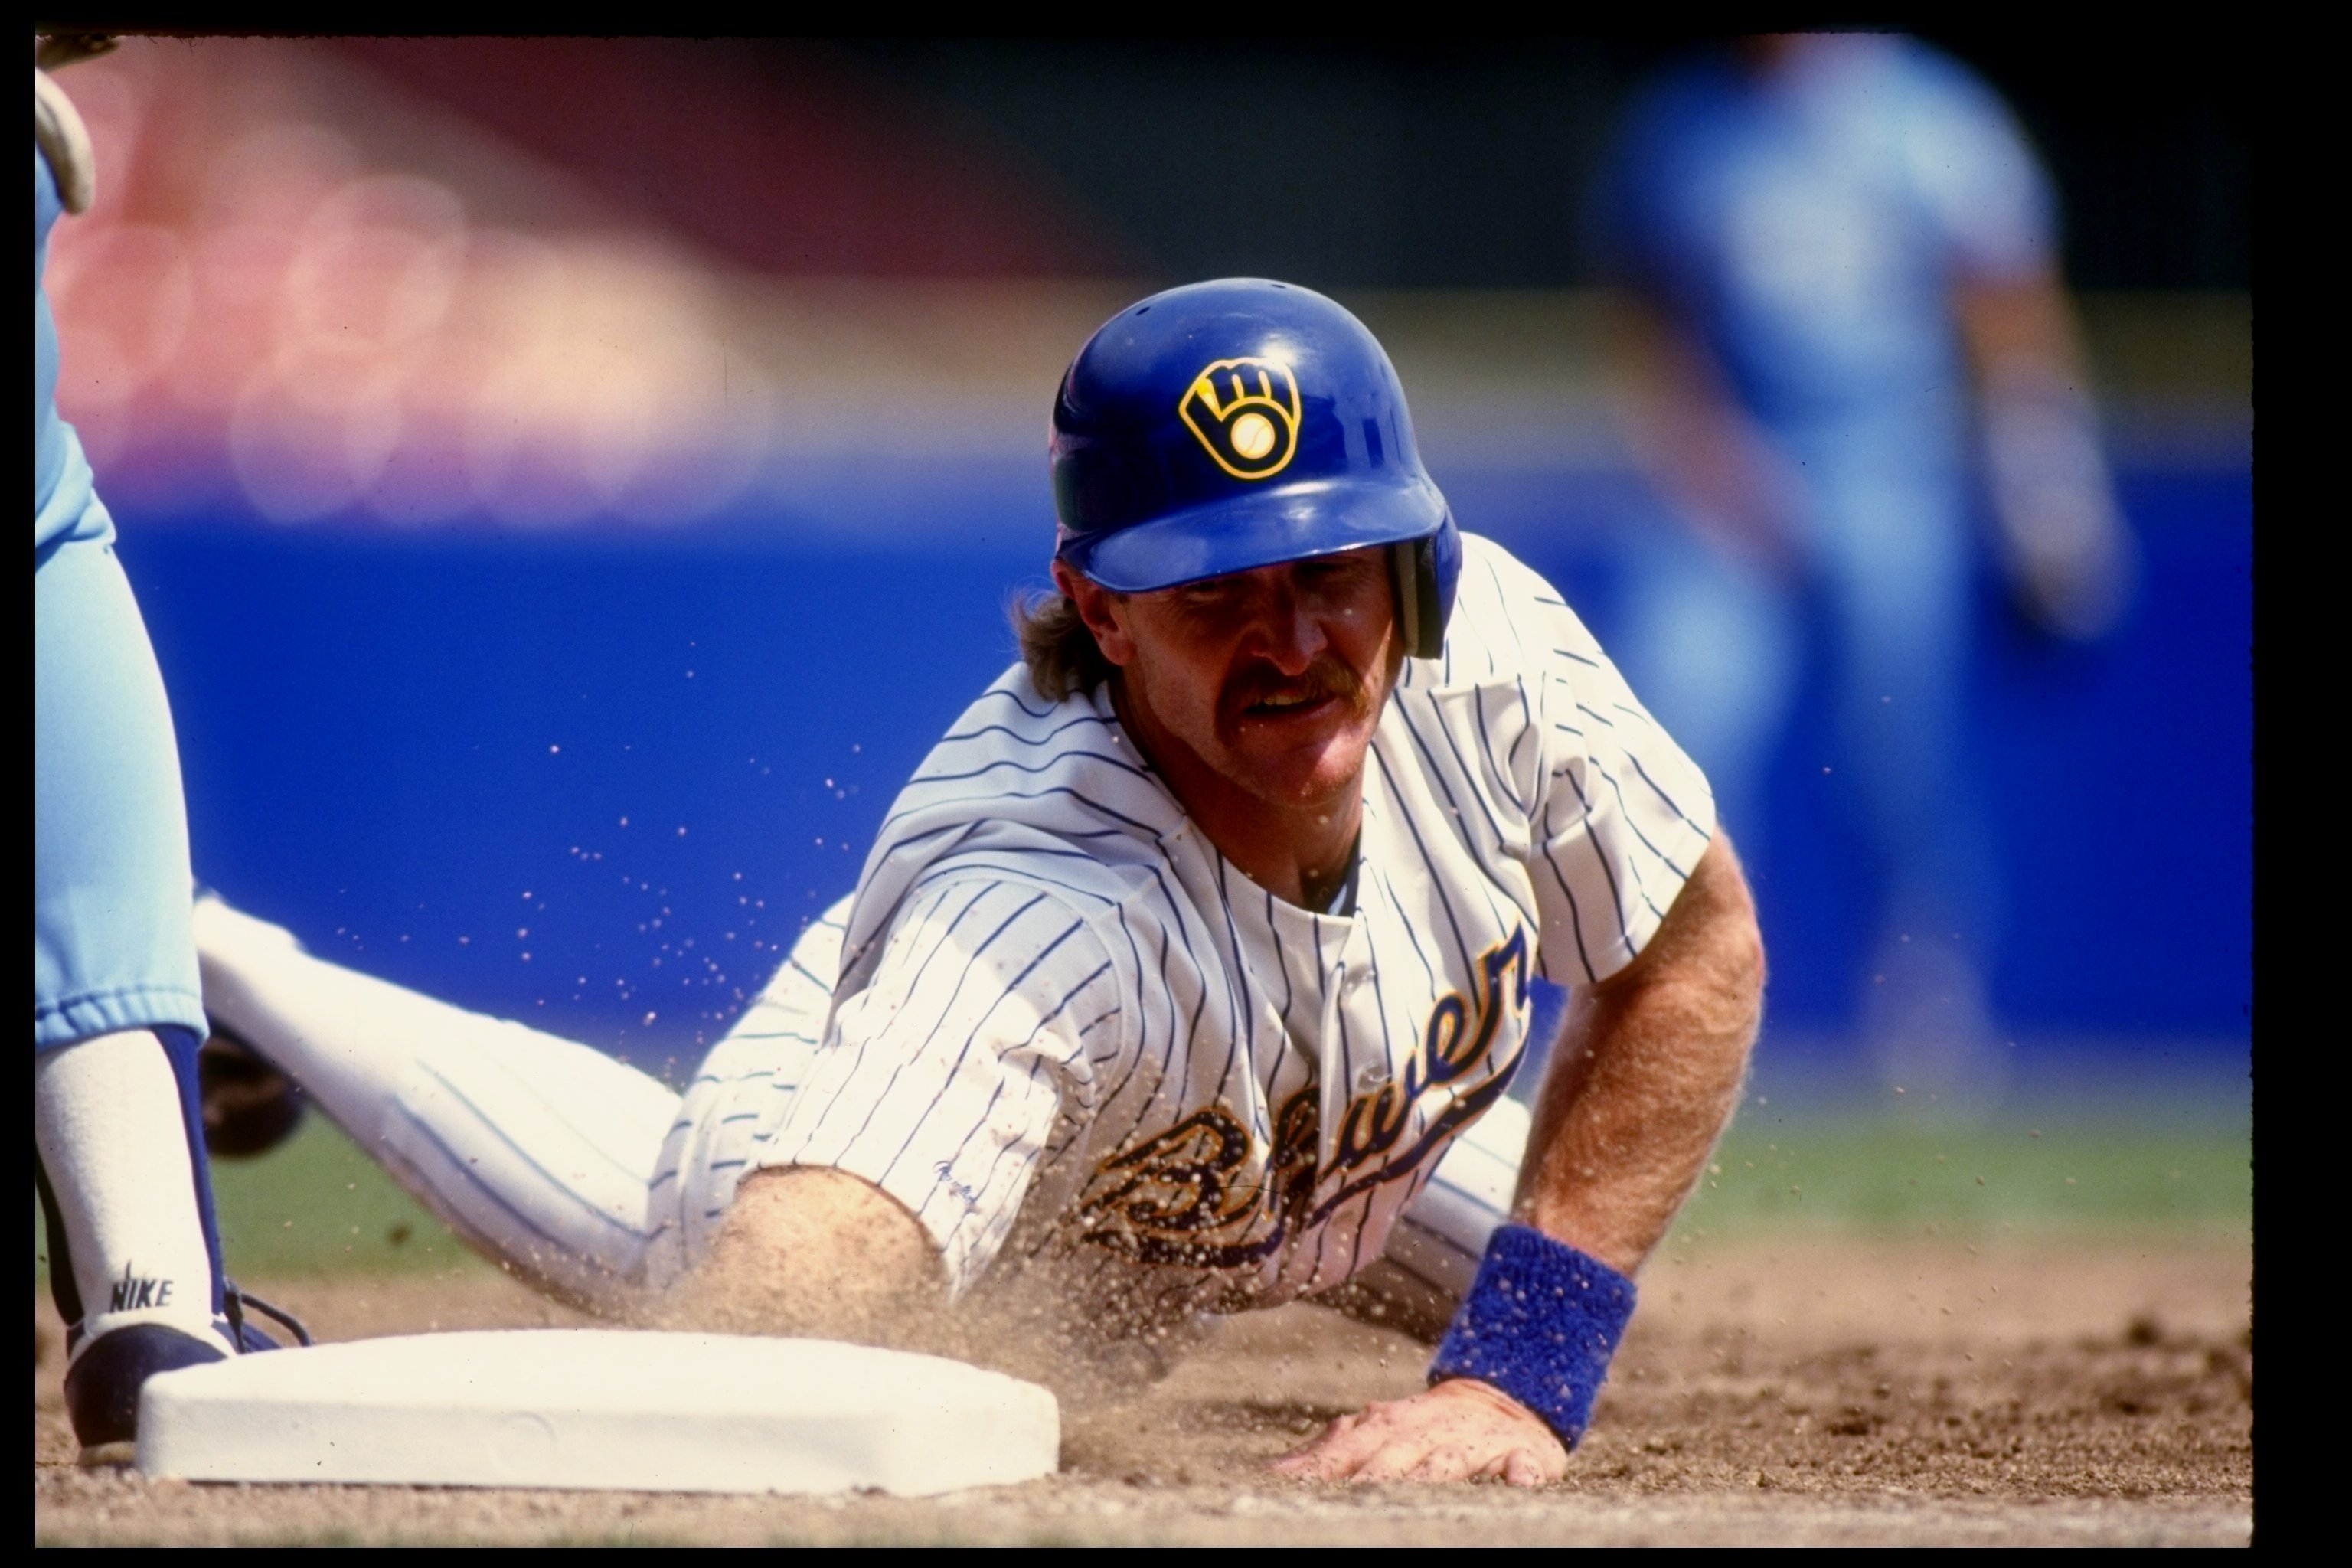 NM/MINT Brewer Peanut Butter Jelly Robin Yount 5x7 Promo Picture WI 